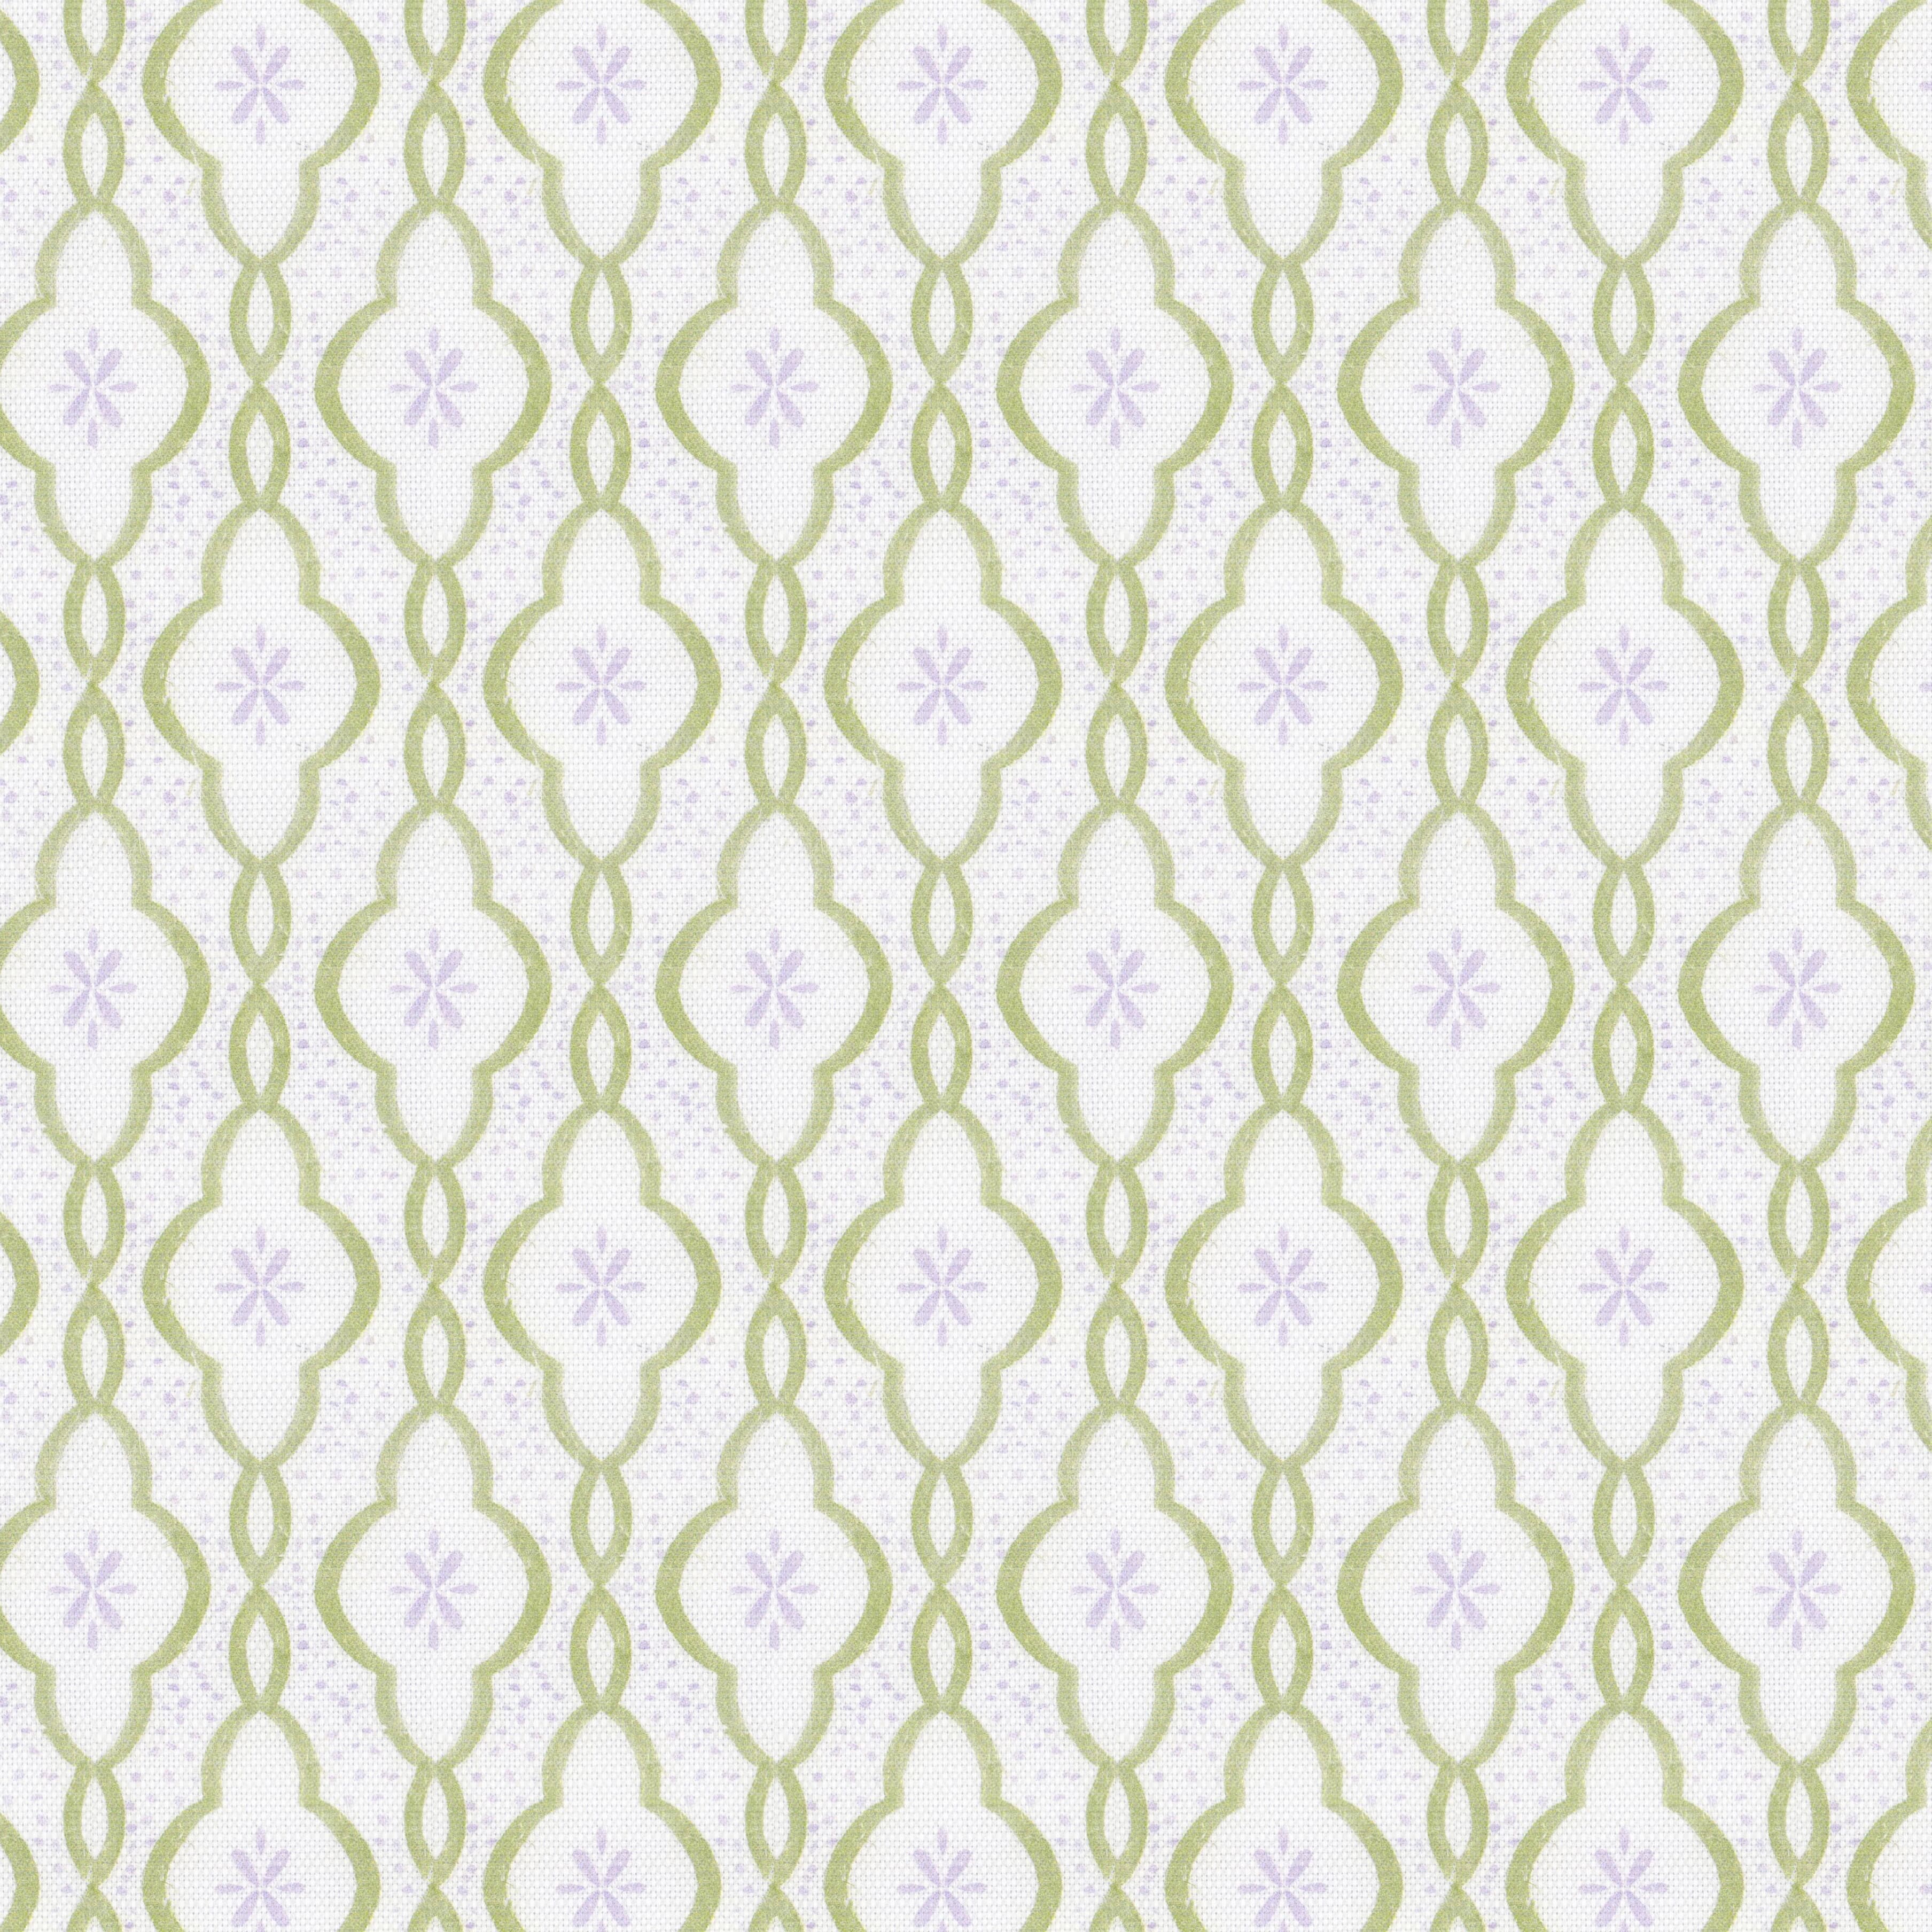 7840 Morocco 4 Lilac by Stout Fabric